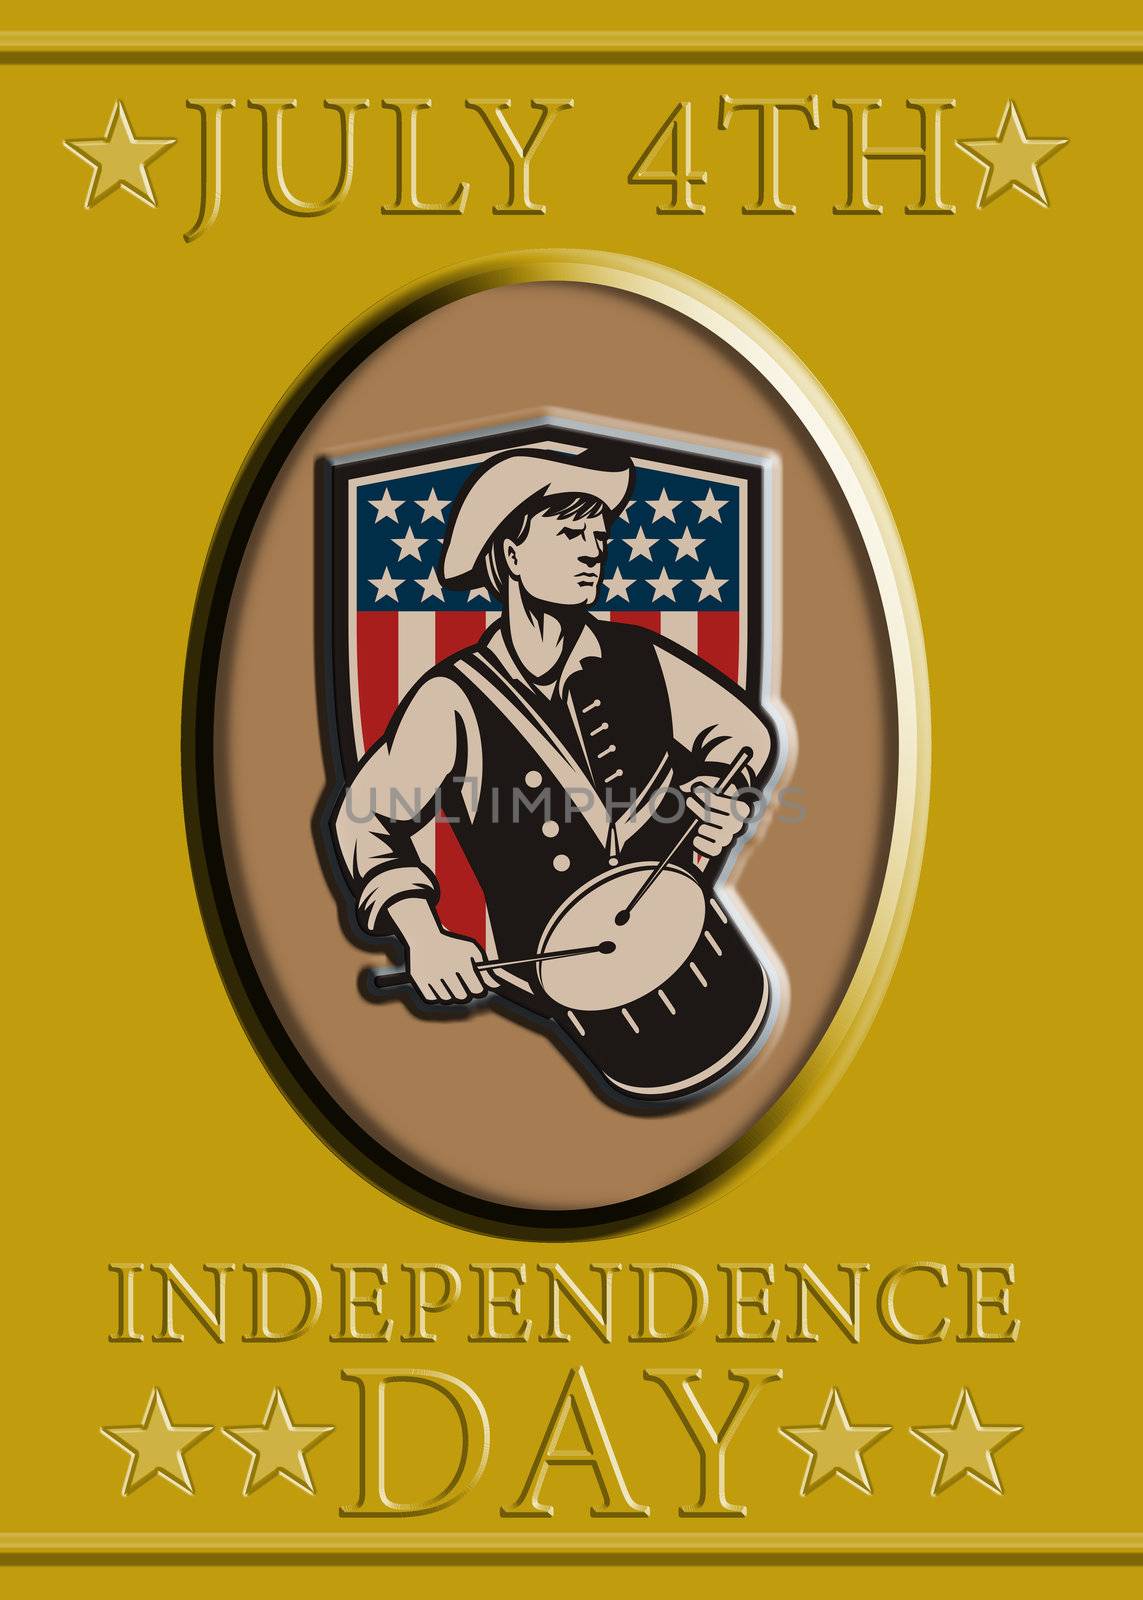 Poster greeting card illustration of a patriot minuteman revolutionary soldier drummer with drum with American stars and stripes flag shield and words july 4th independence day